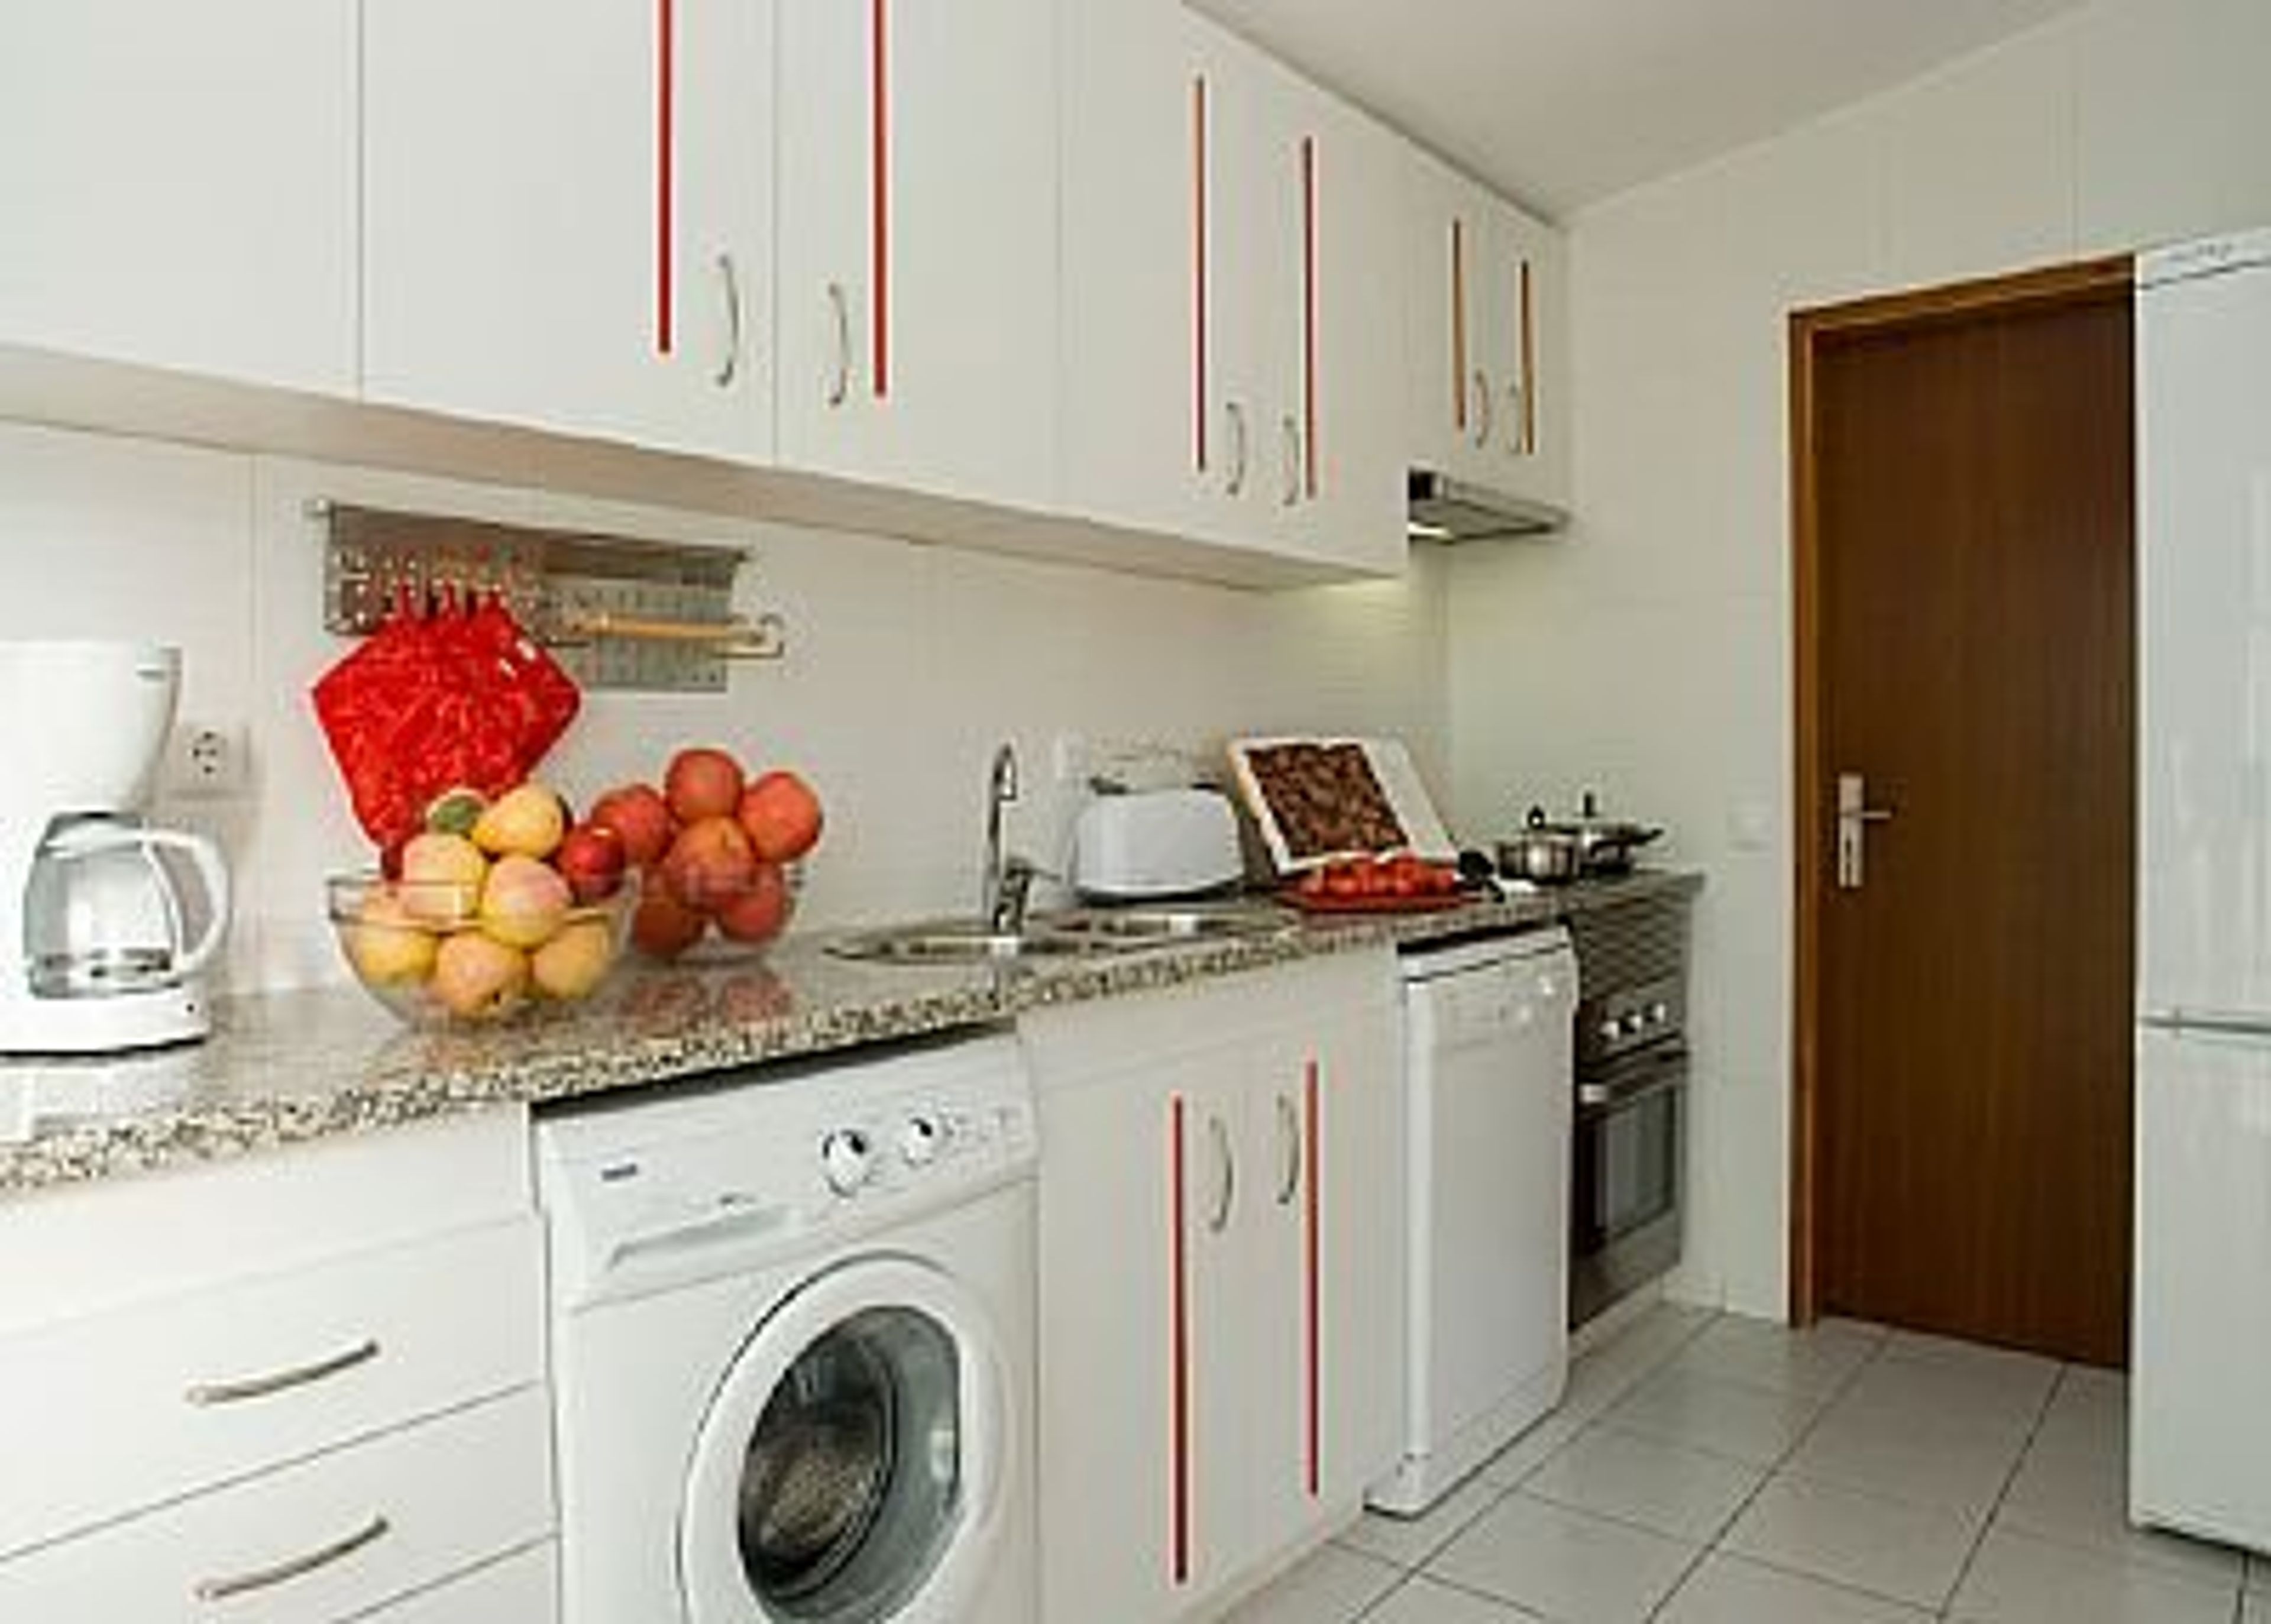 Fully integrated kitchen